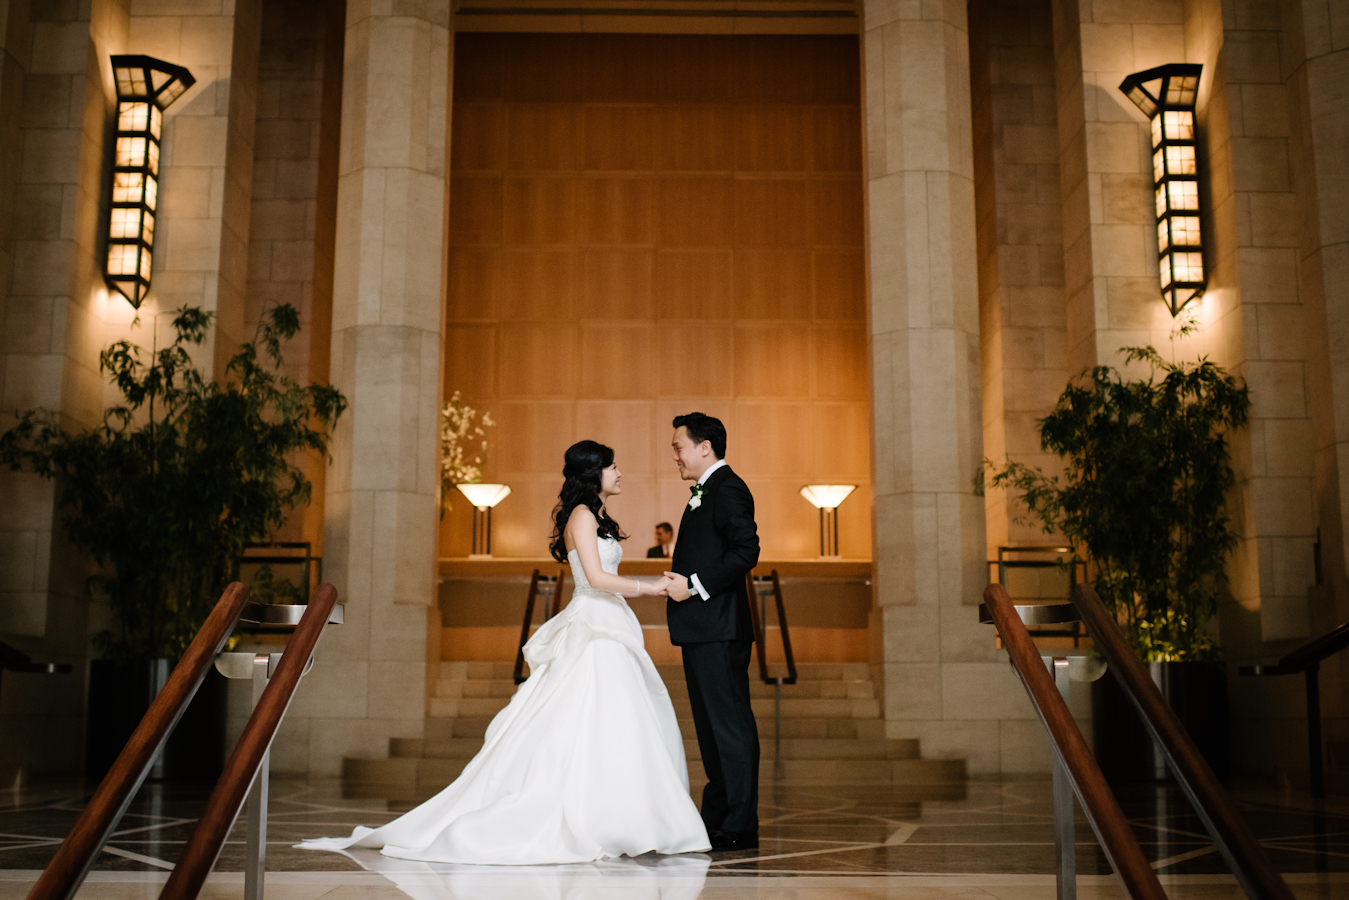 four seasons hotel wedding ang weddings and events brian hatton photography-12.jpg